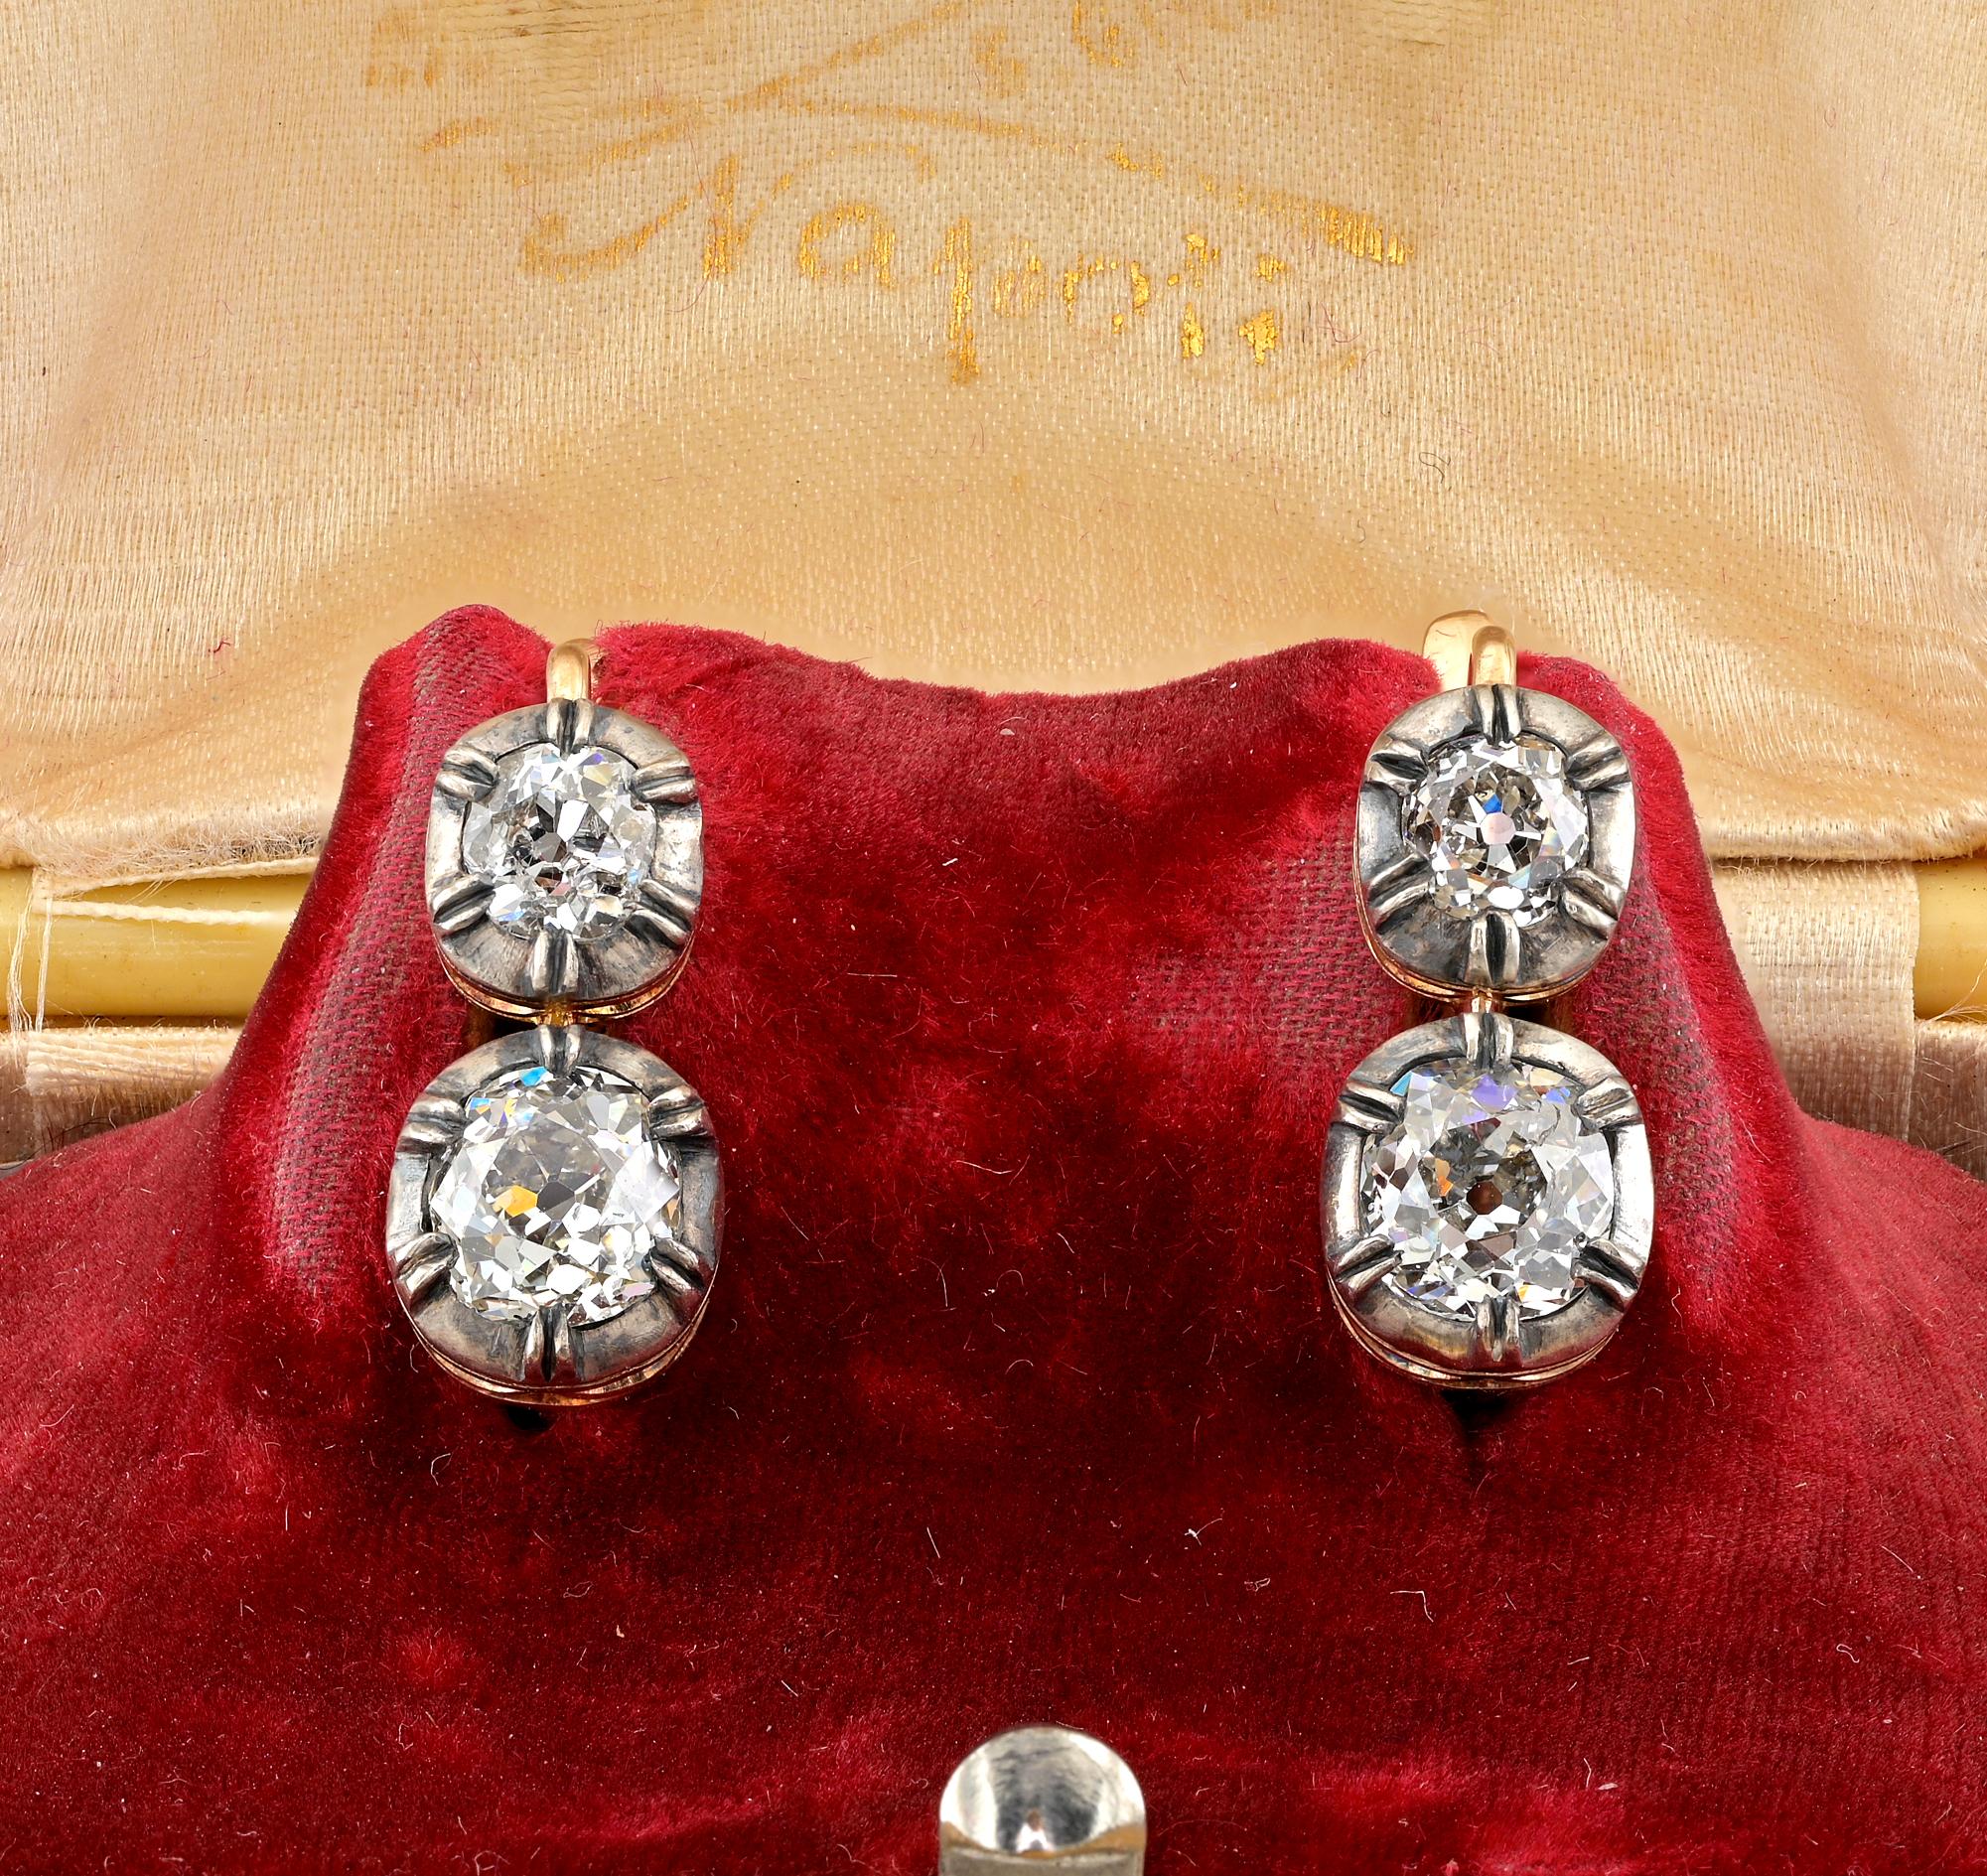 Superb pair of good sized Diamond drop earrings superbly hand crafted of solid 18 Kt gold topped by silver
Classy Victorian style design with a gorgeous open work and darkened silver pie setting giving life to a combination of antique Diamonds